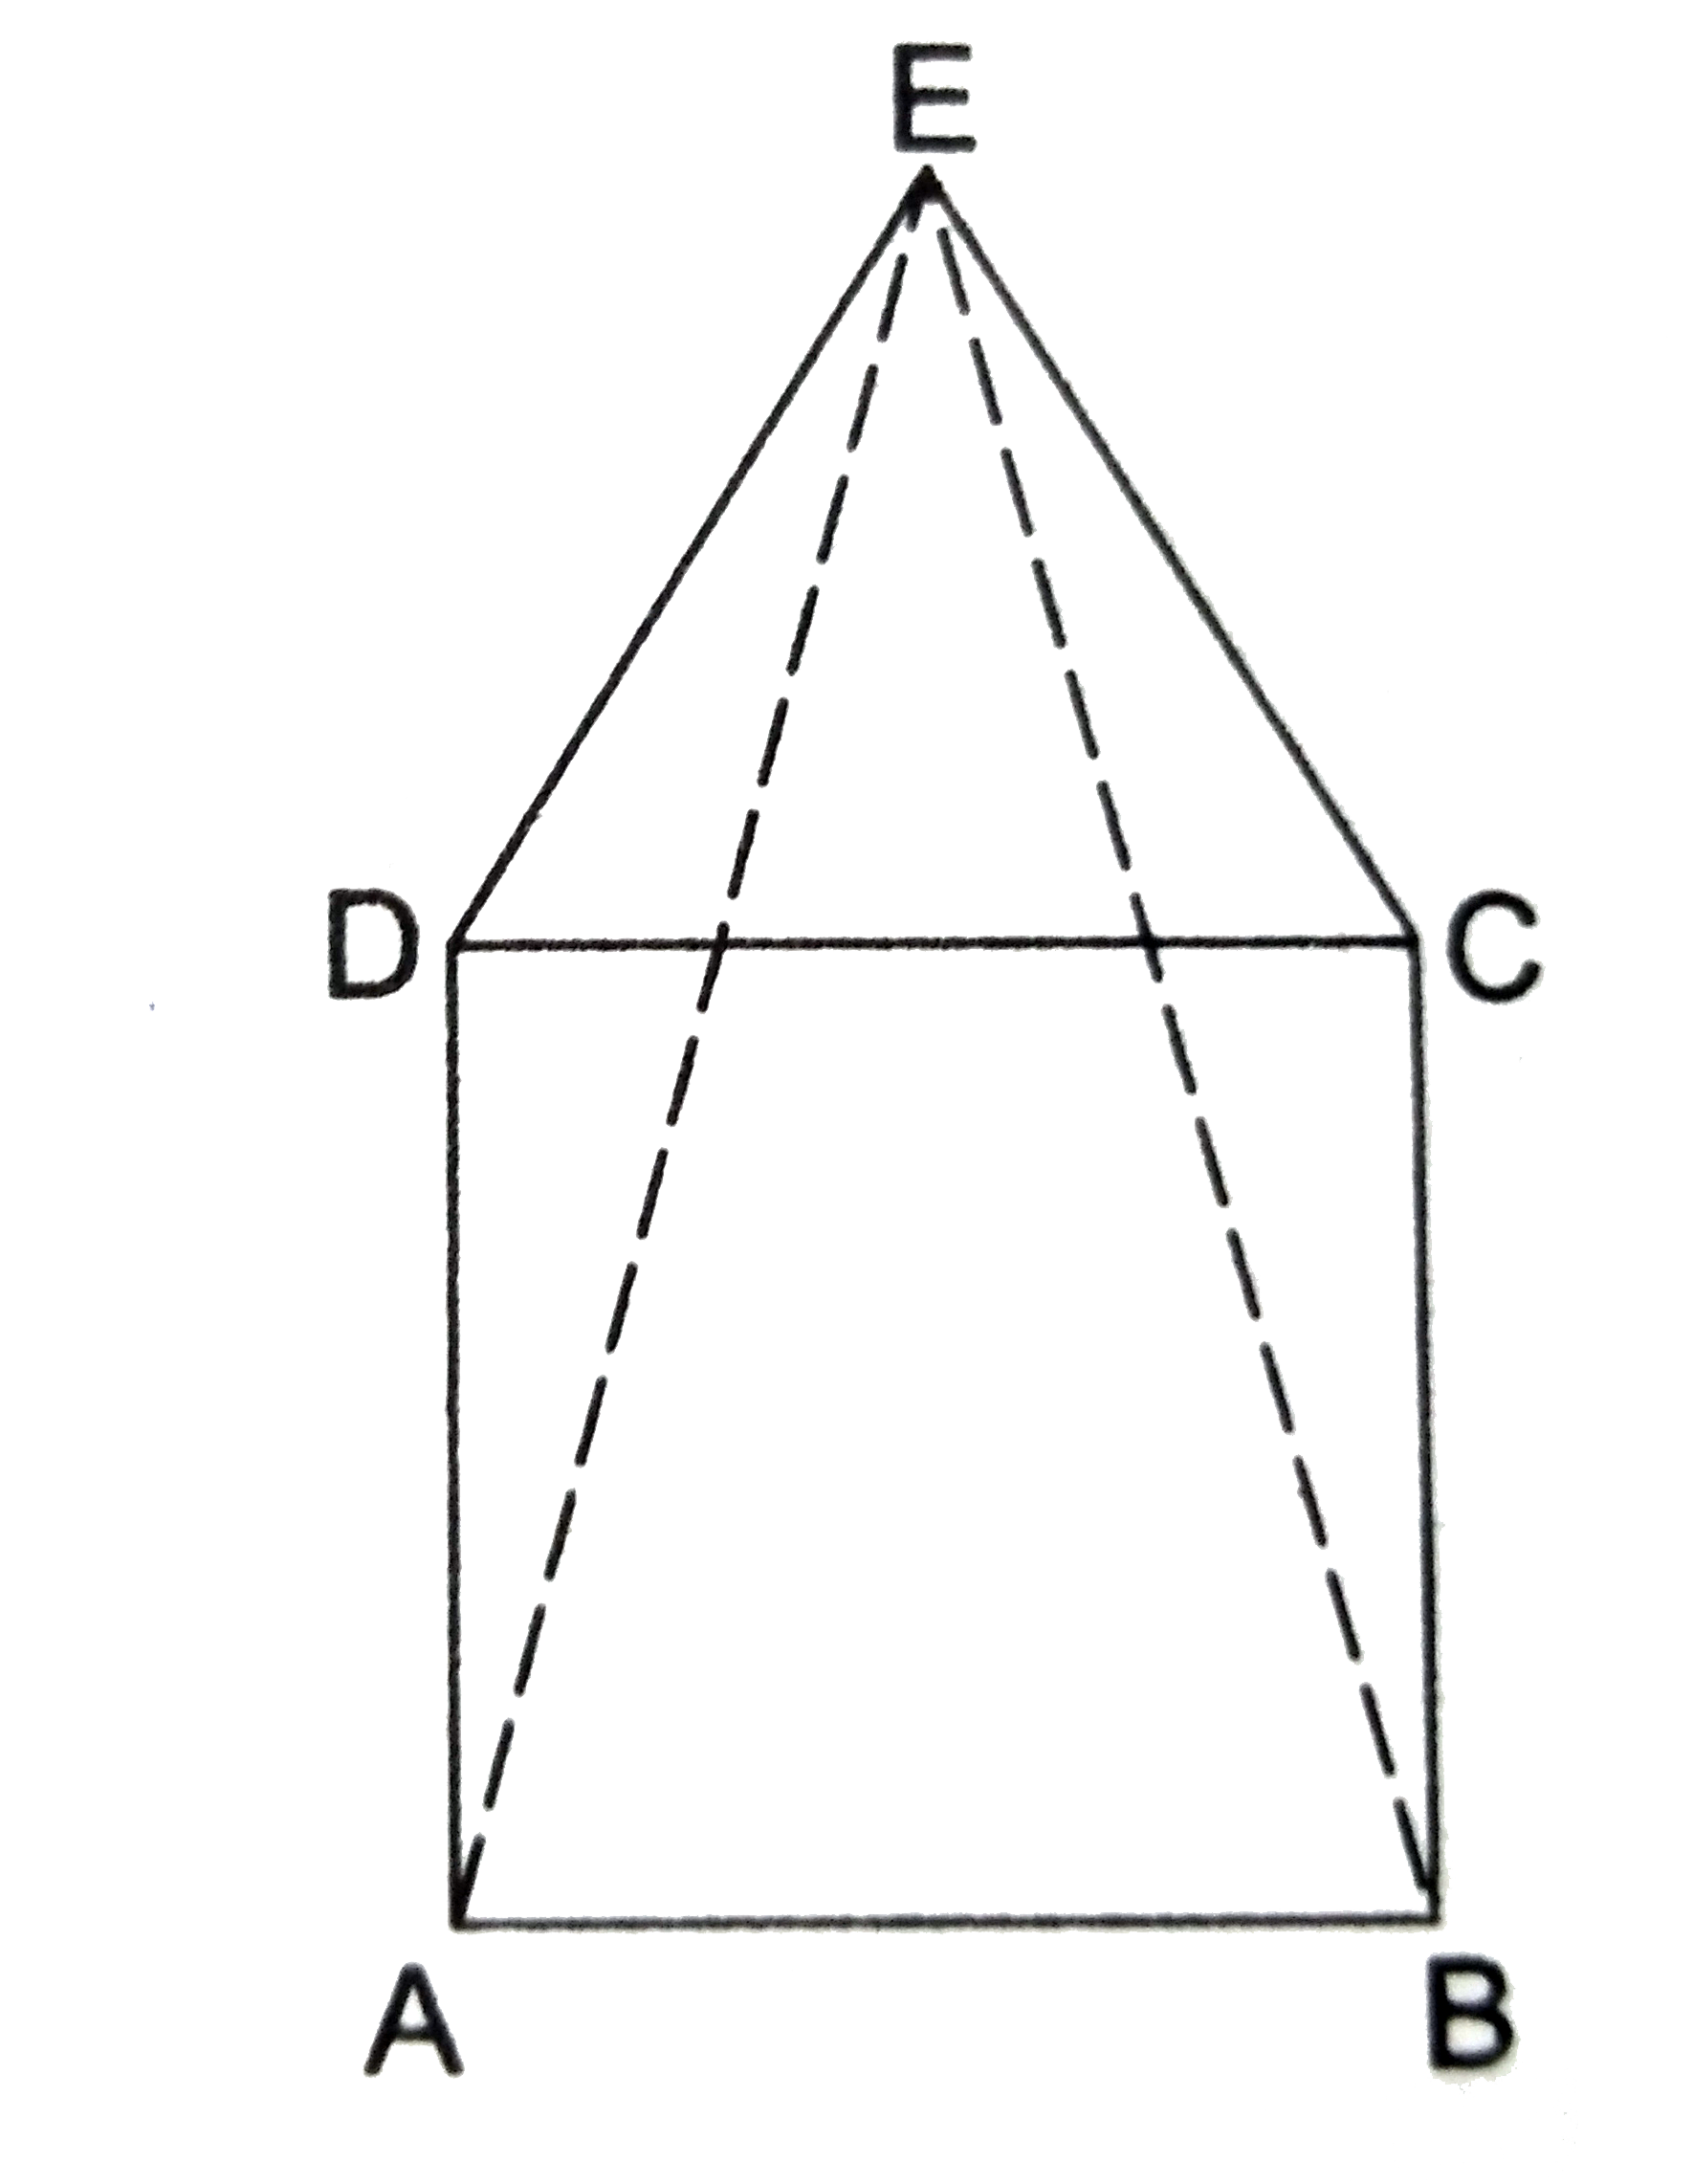 In the adjoining figure, ABCD is a square and triangle EDC  is an equilateral triangle. Proove that   (i) AE=BE,